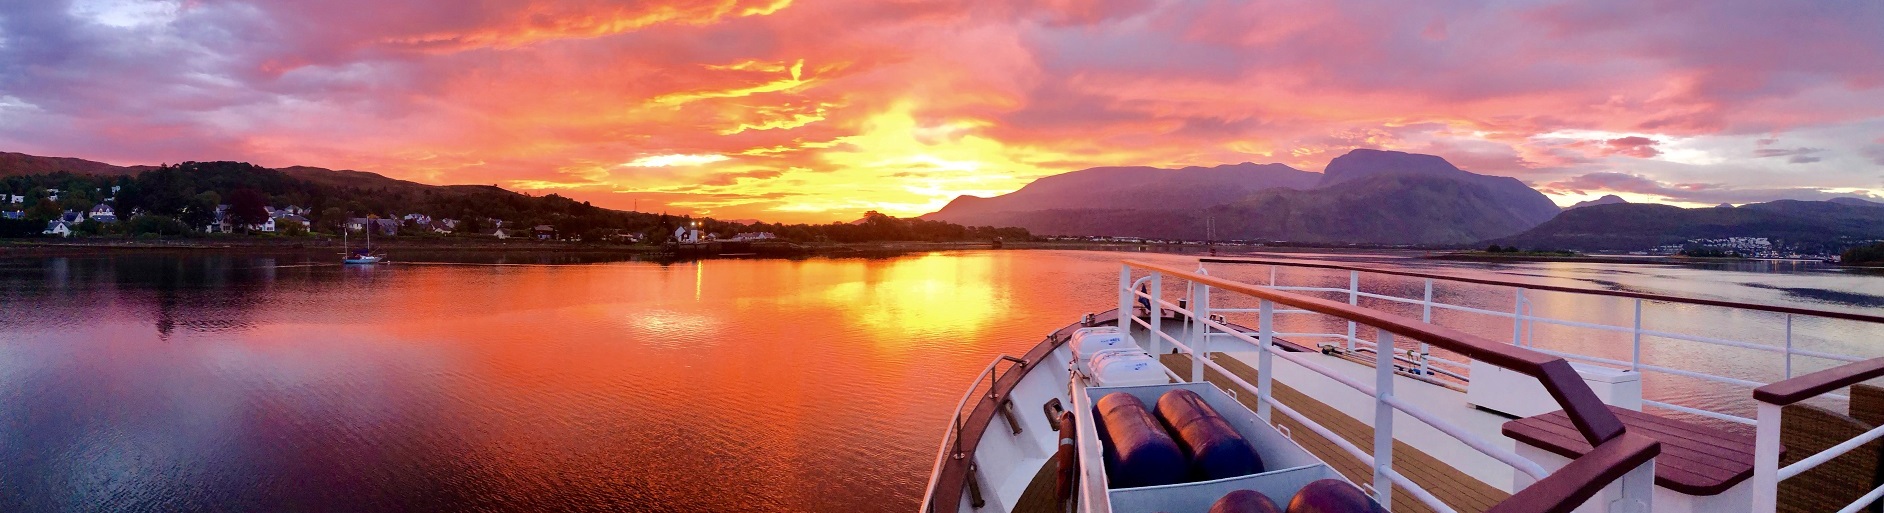 Sunrise Caledonian Canal and Loch Ness Cruise by James Fairbairns